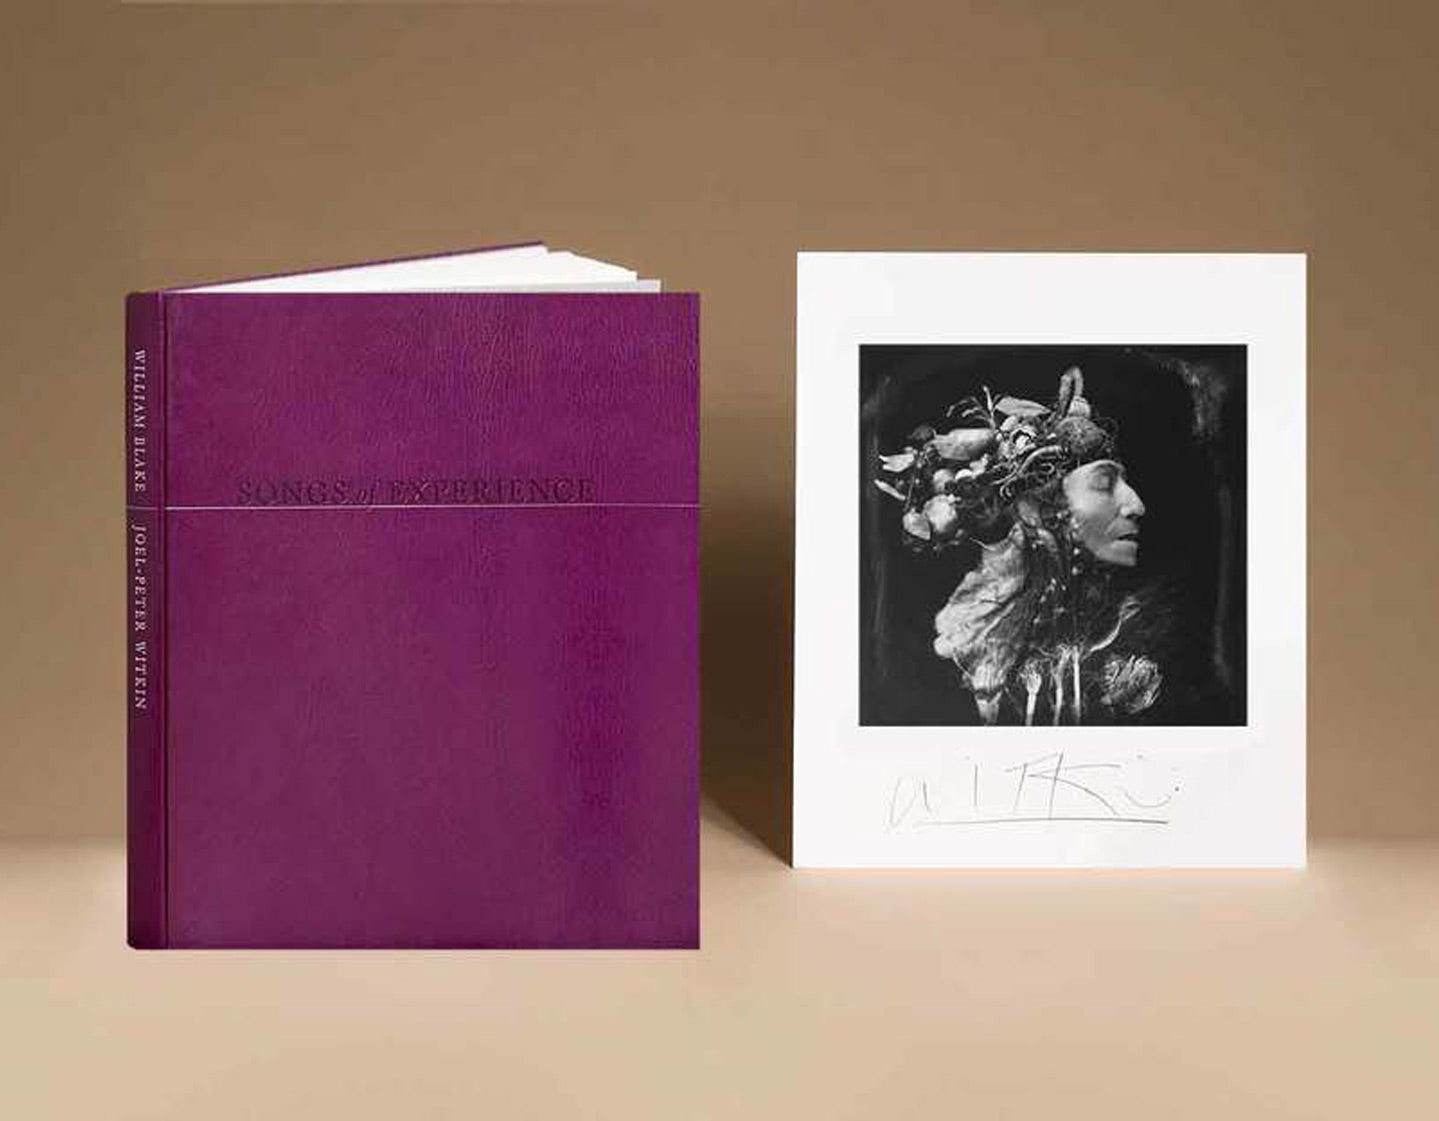 Joel-Peter Witkin: Songs of Experience, Limited Edition, and Songs of Innocence, Limited Edition (21st Platinum Edition) (with a Total, in Both Editions, of 2 Freestanding and 20 Bound Platinum Prints)